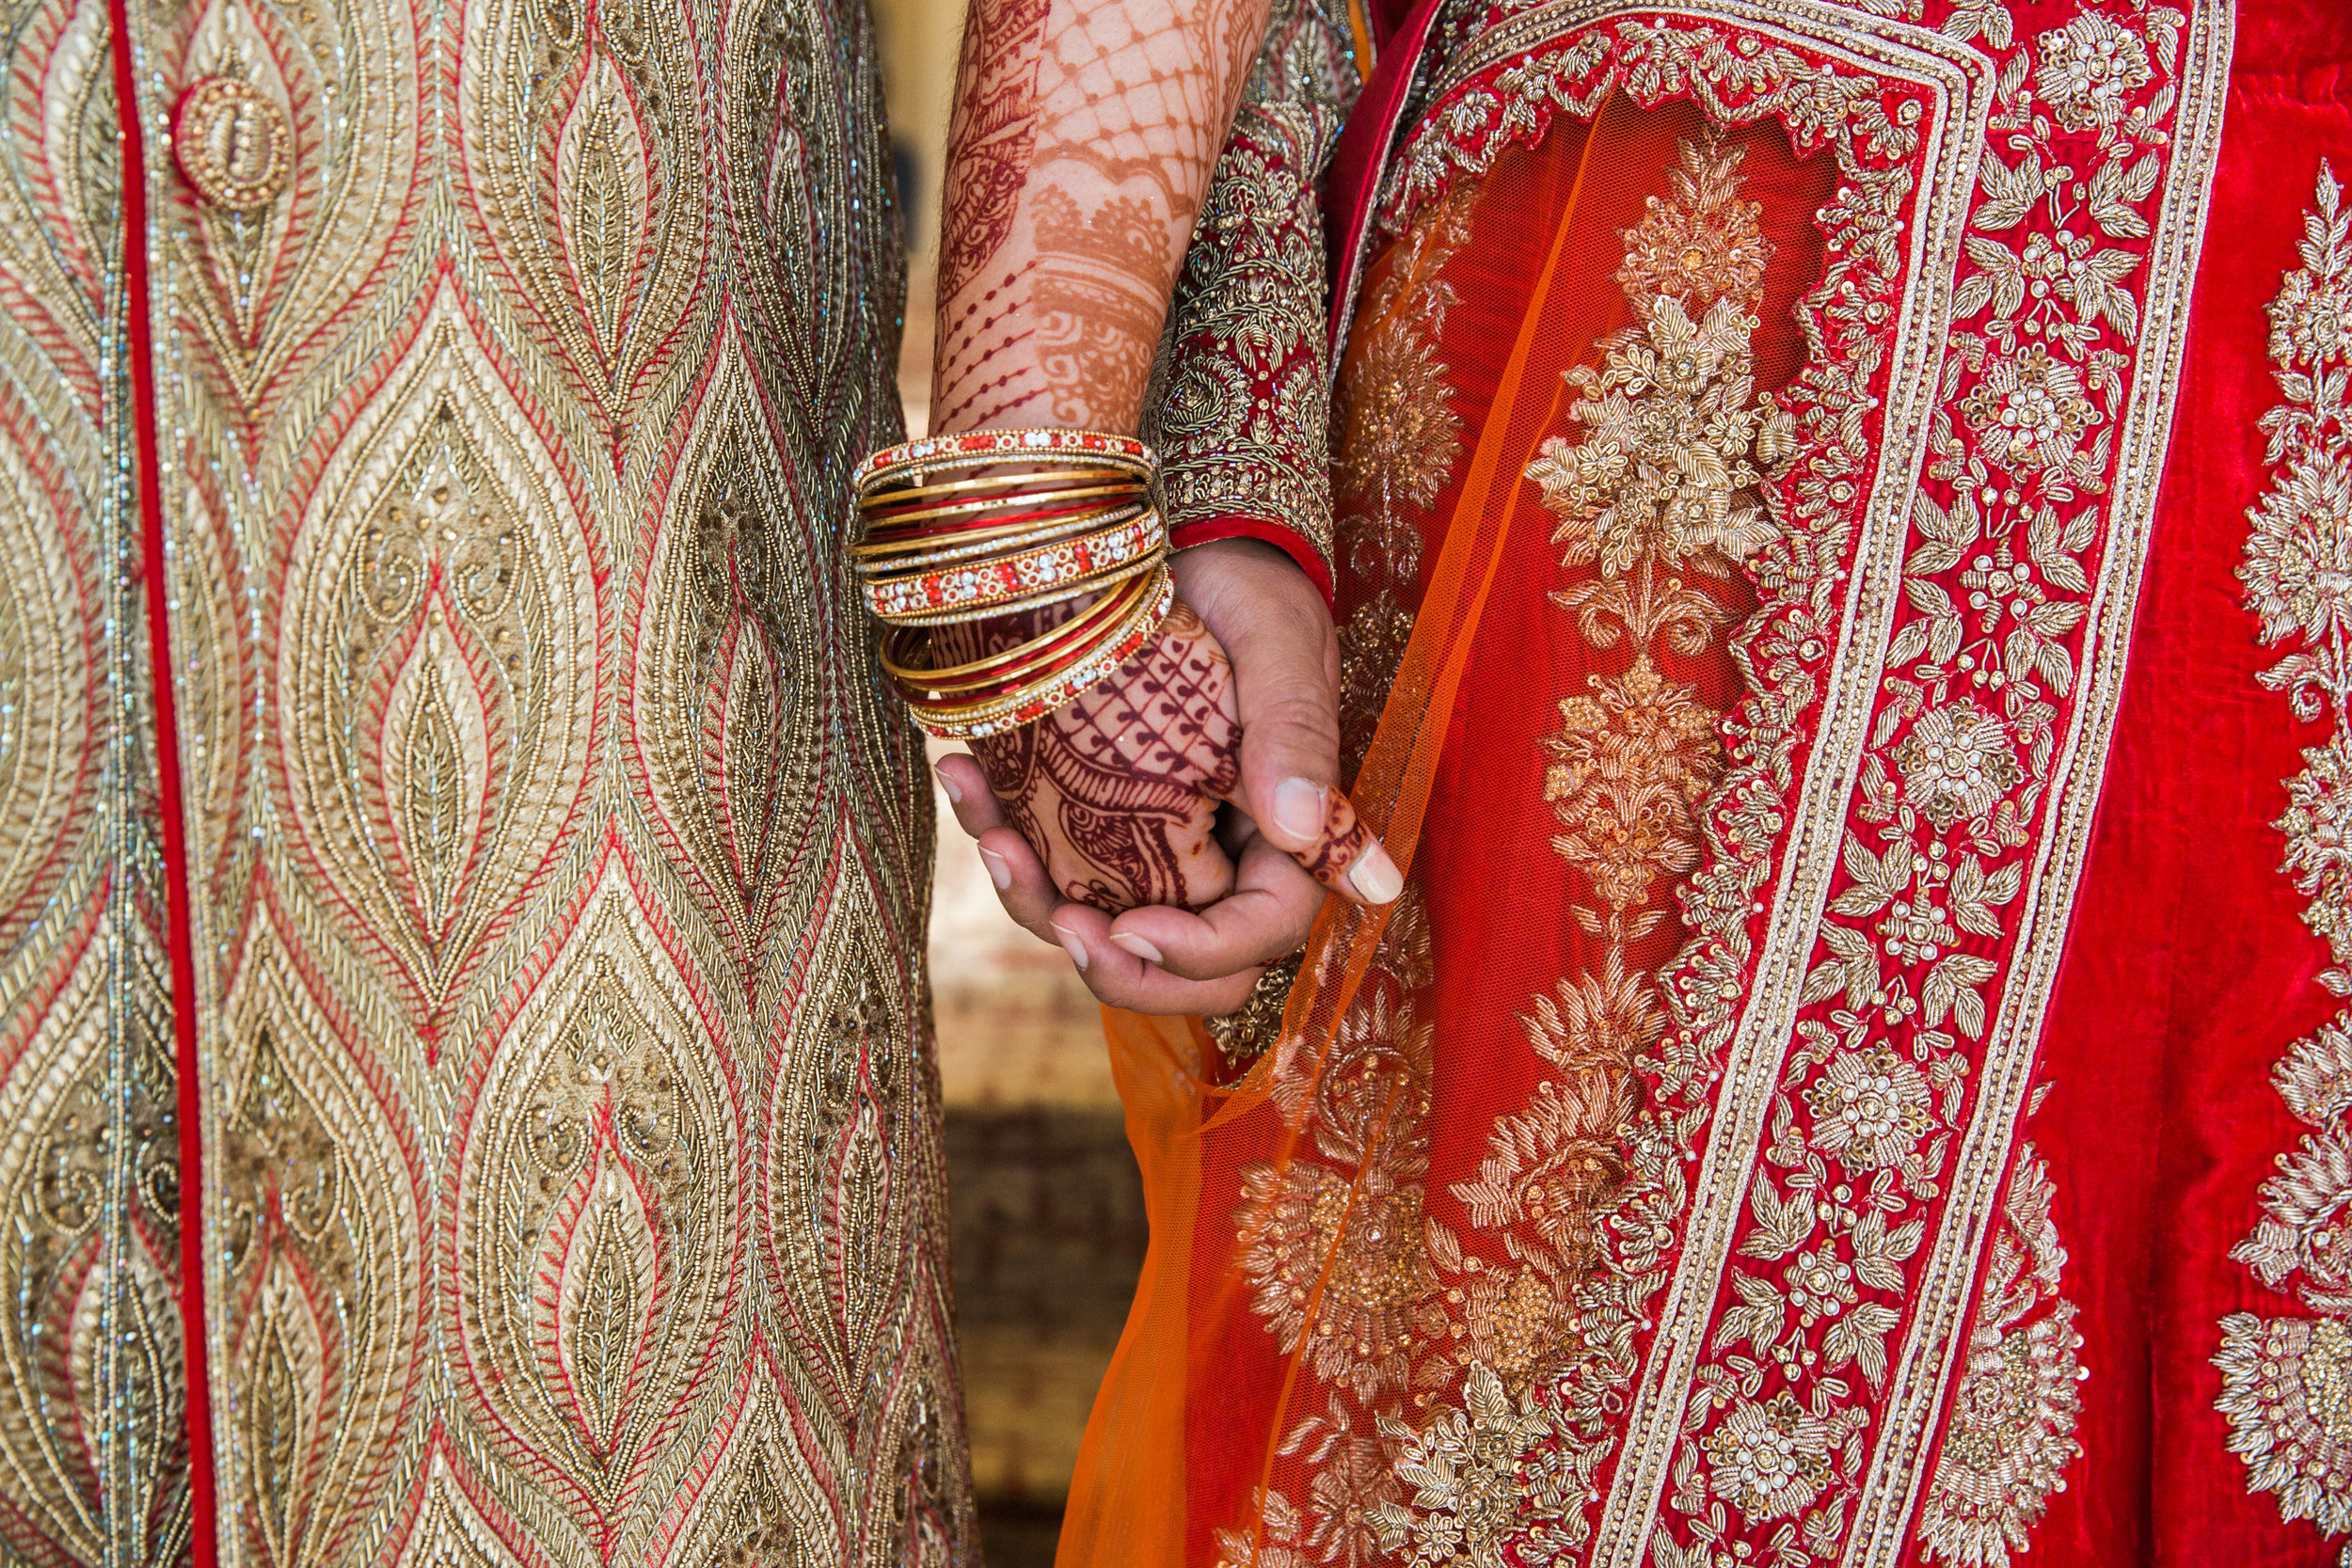 Top Indian Wedding Photography in Maryland by Megapixels Media.jpg